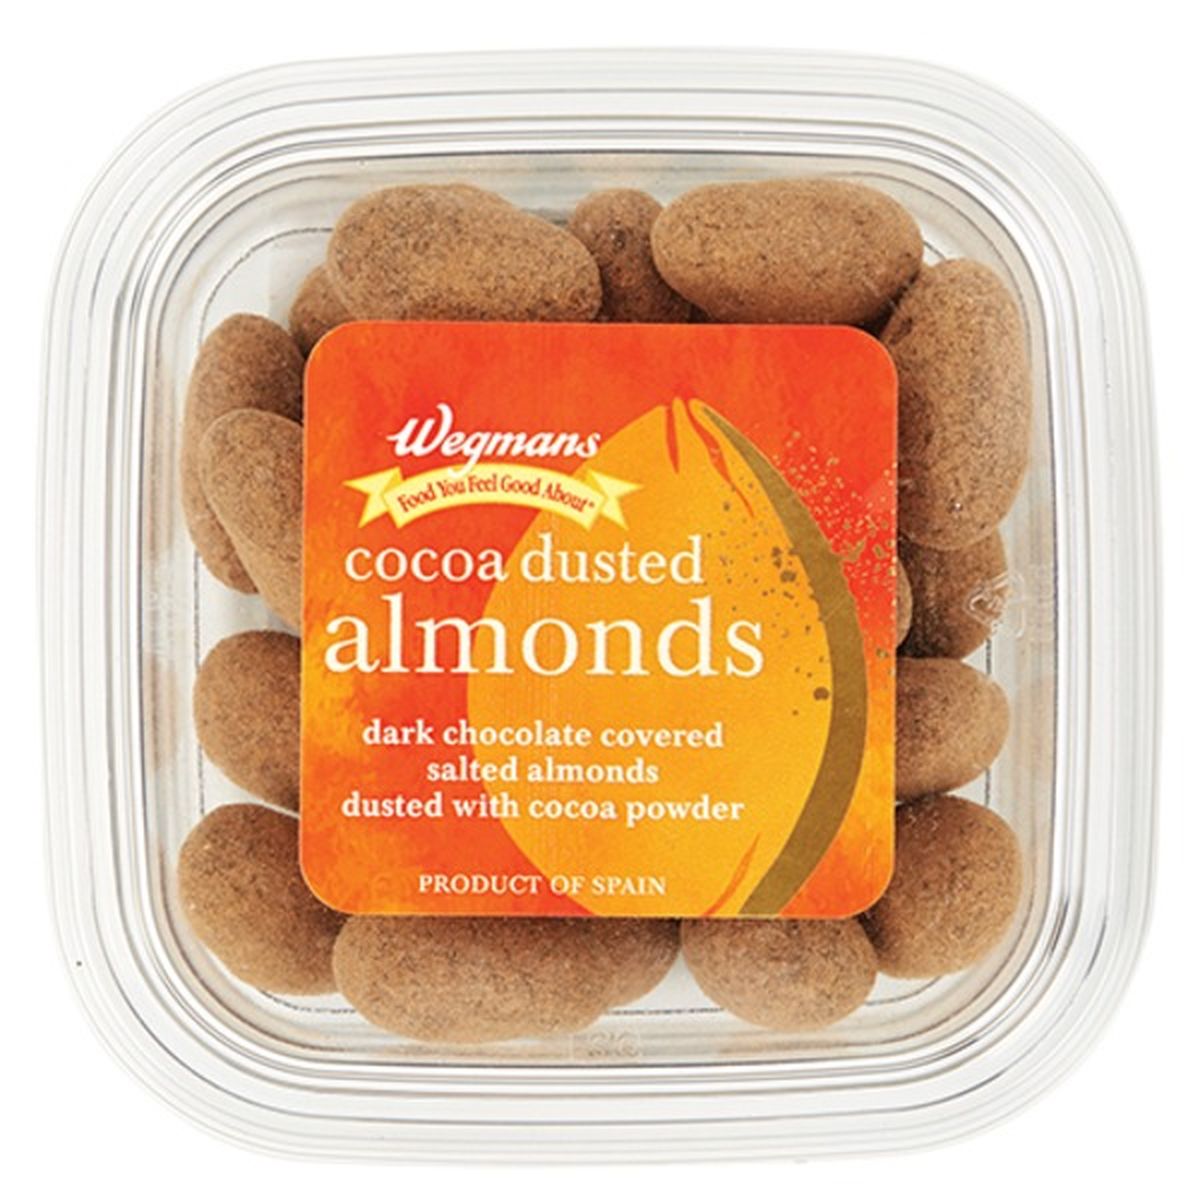 Calories in Wegmans Cocoa Dusted Almonds